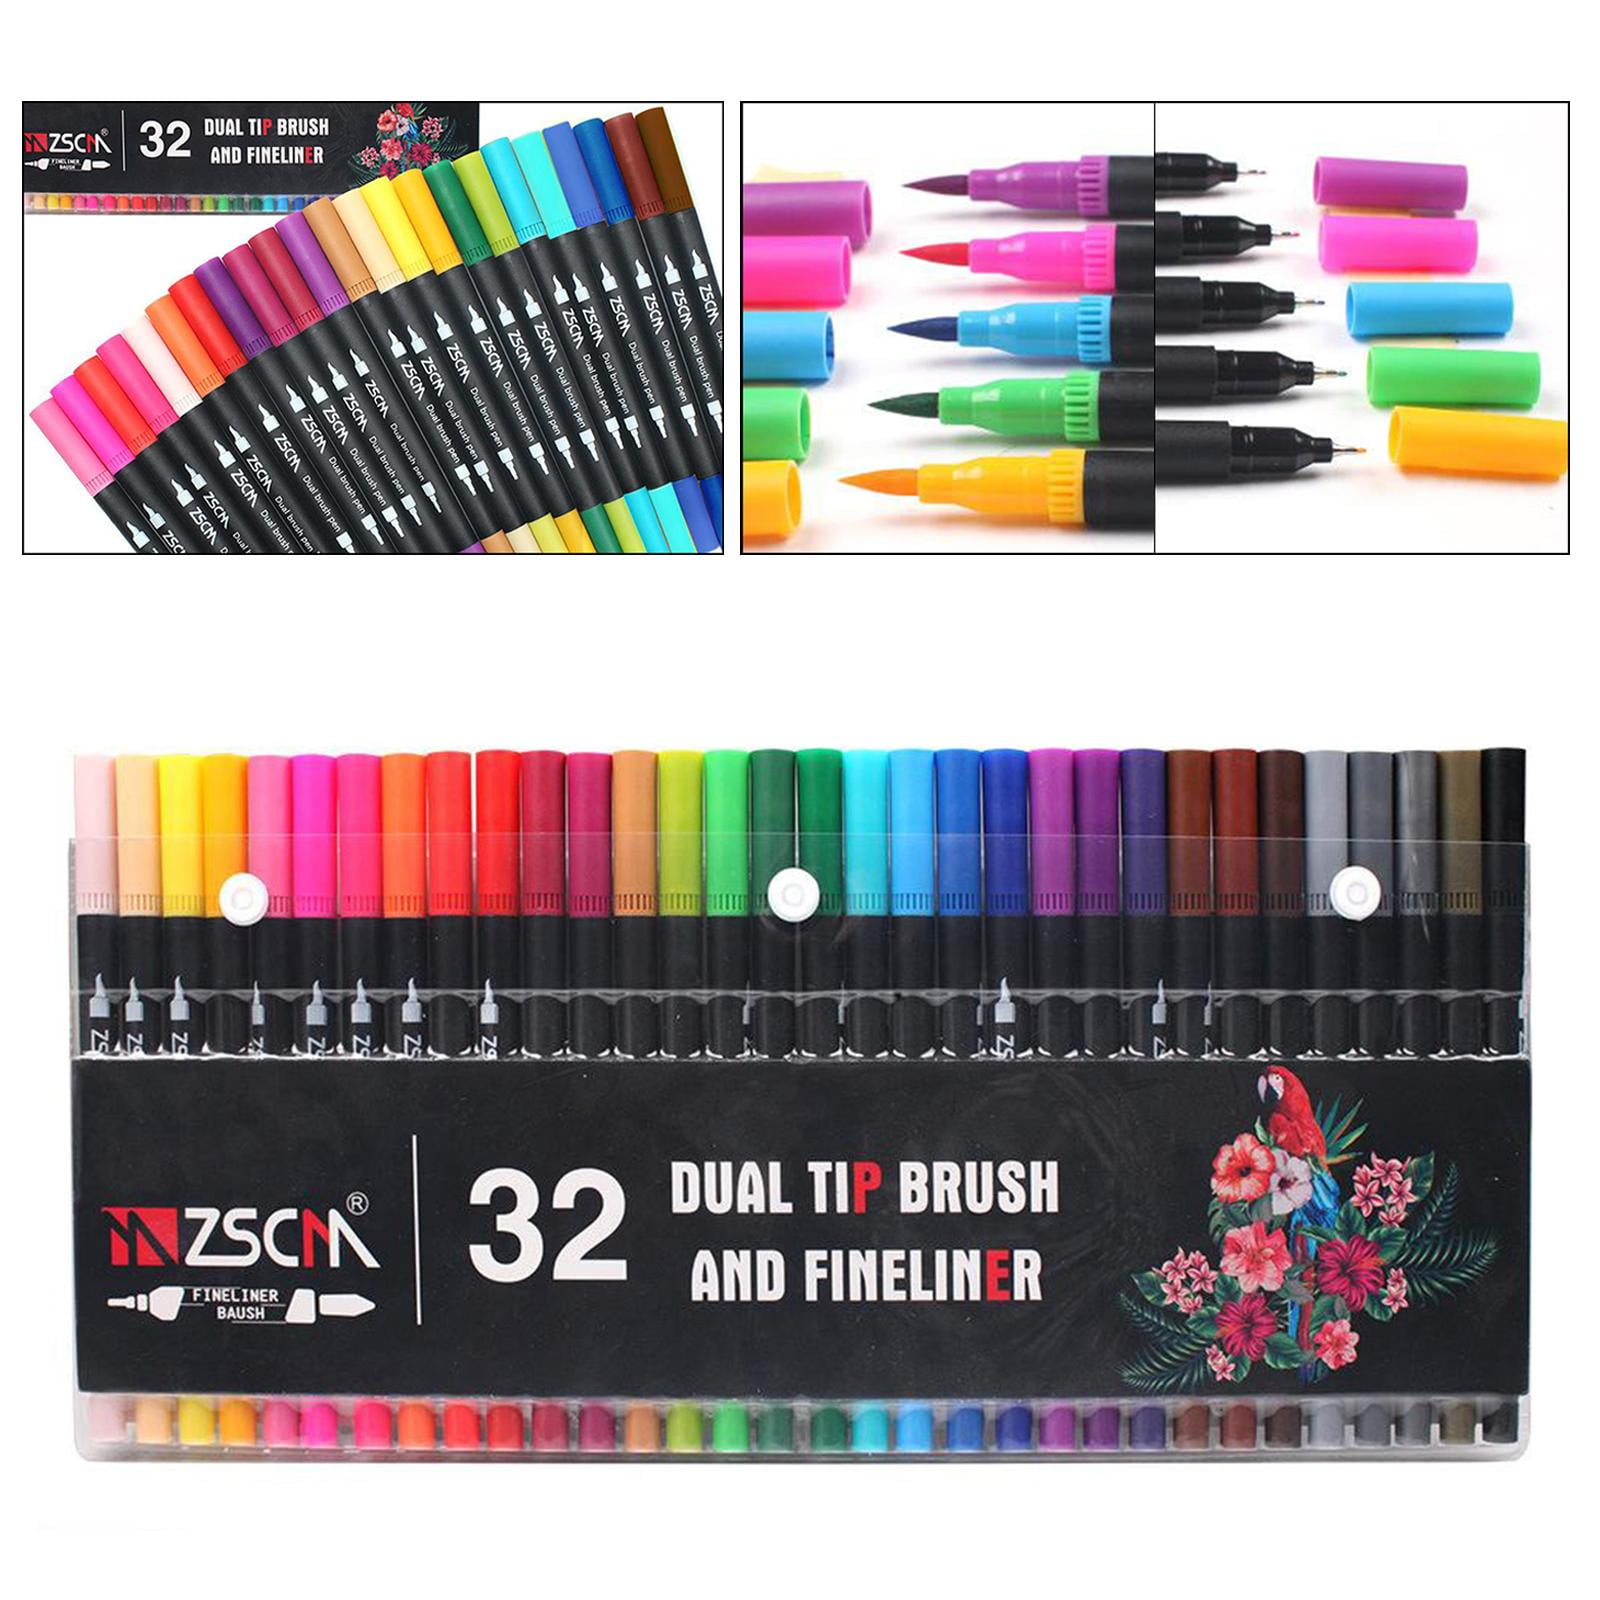 Soucolor Dual Tip Brush Markers Pens, 32 Fine Point and Brush